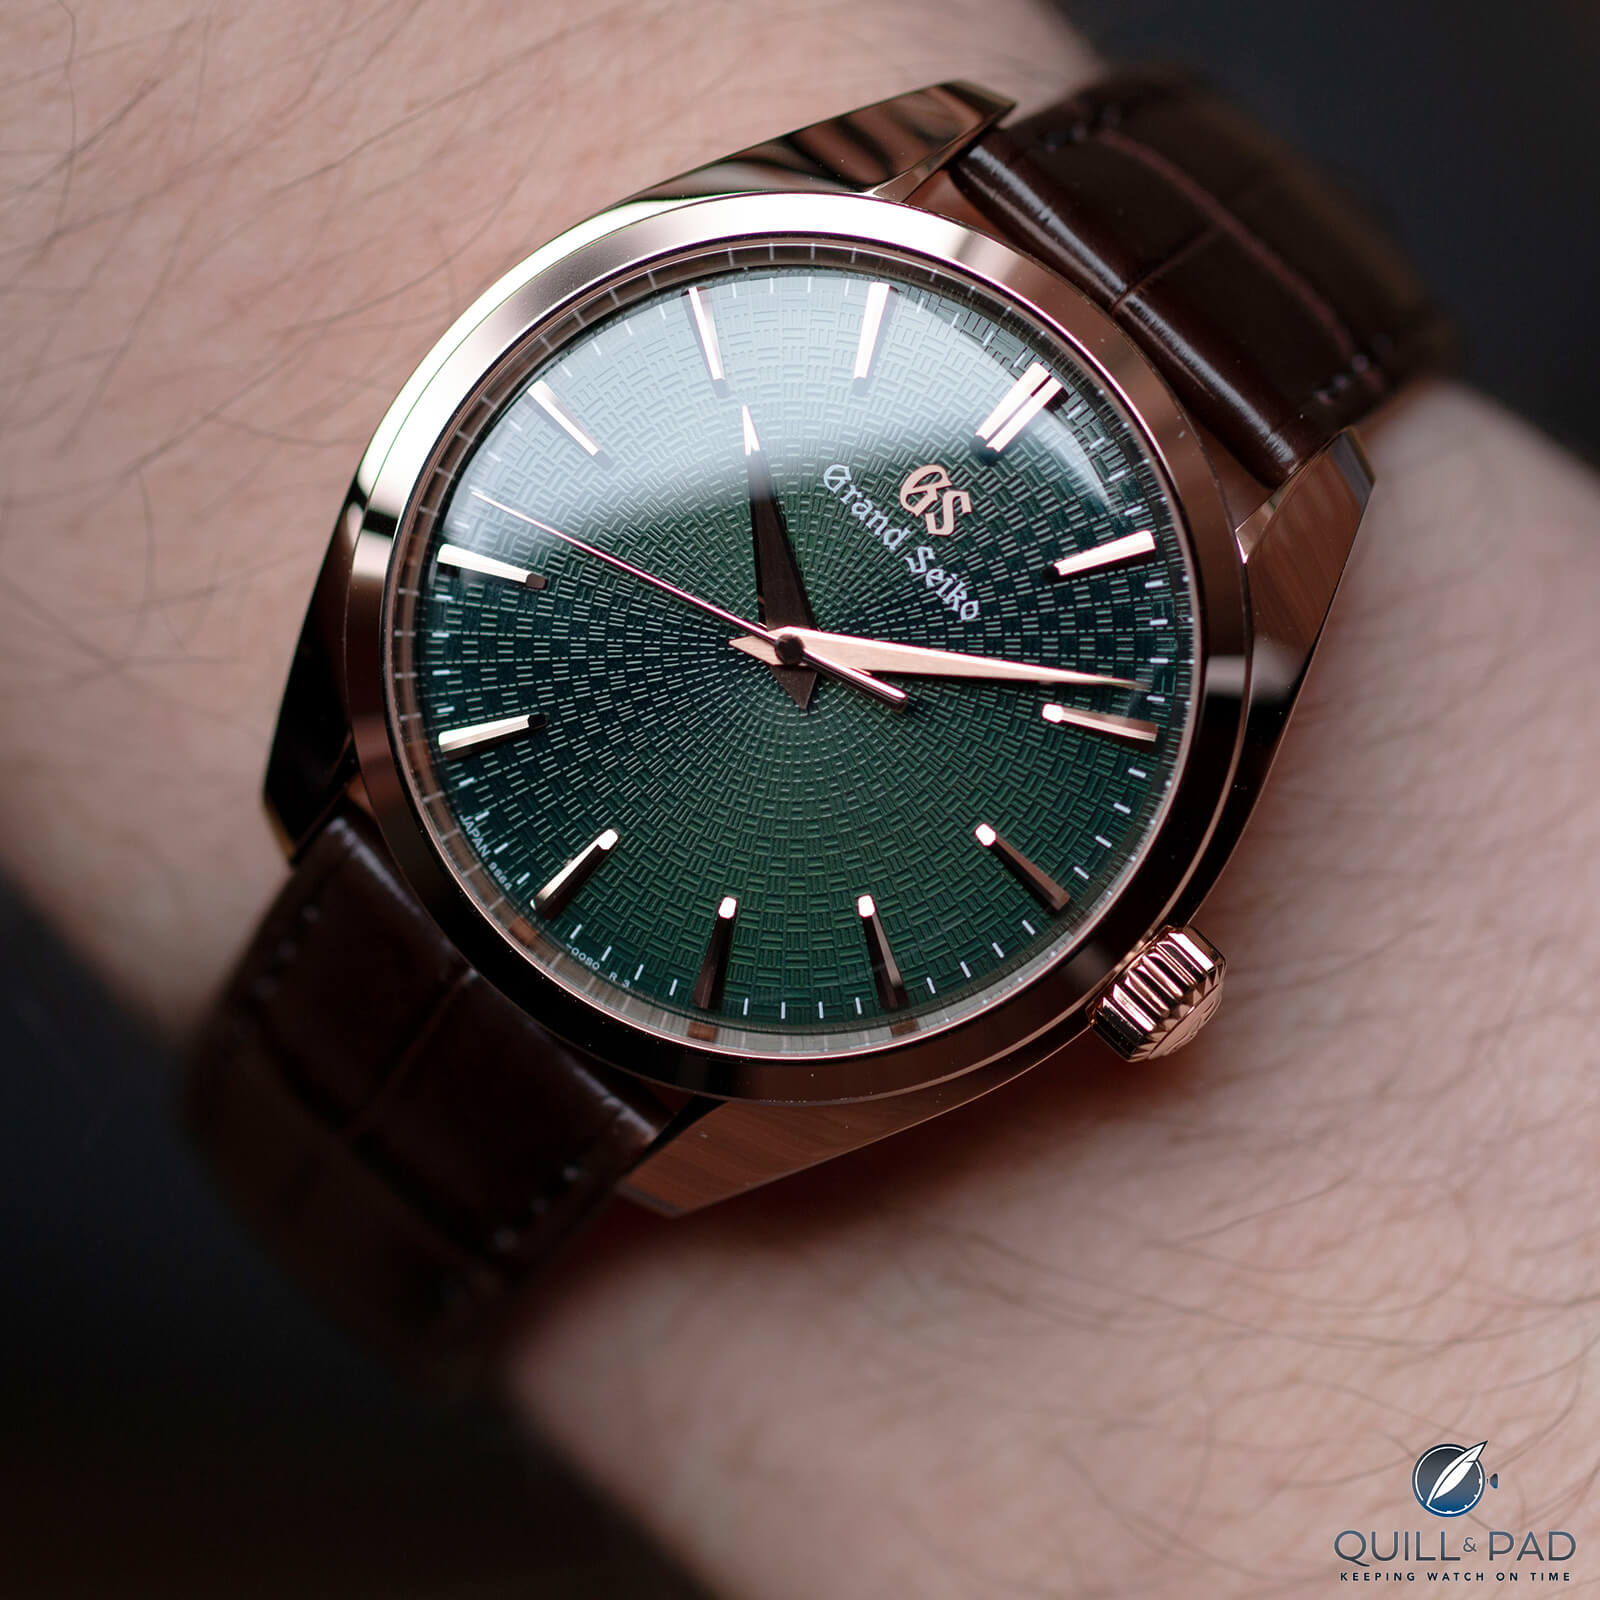 Grand Seiko Elegance SBGW263 And SBGW264: Using The Principles Of Japanese  Aesthetics - Reprise - Quill & Pad